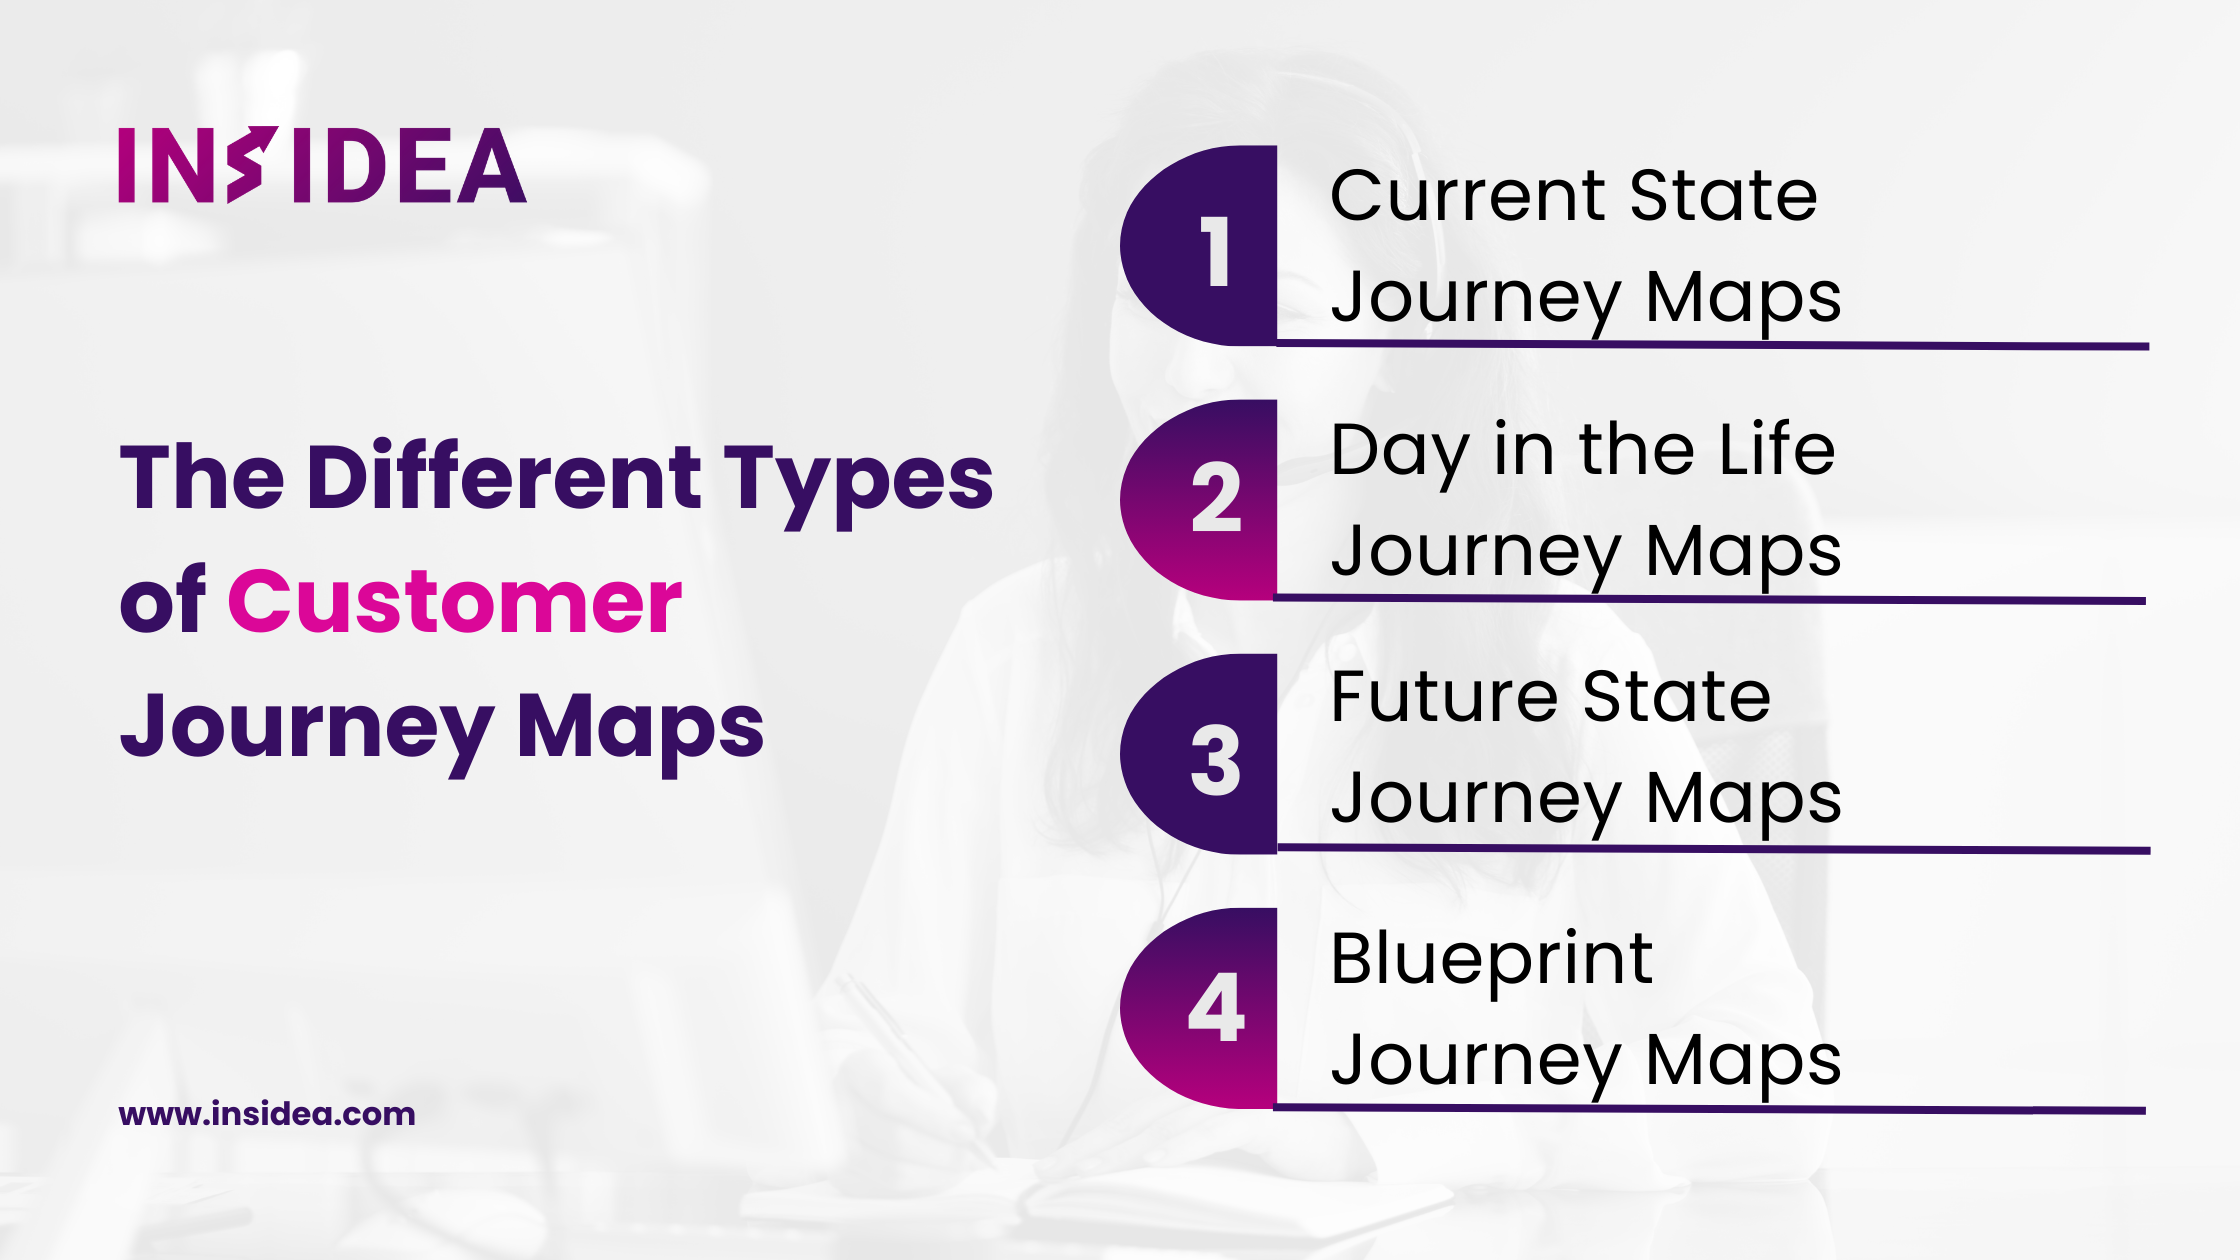 The Different Types of Customer Journey Maps